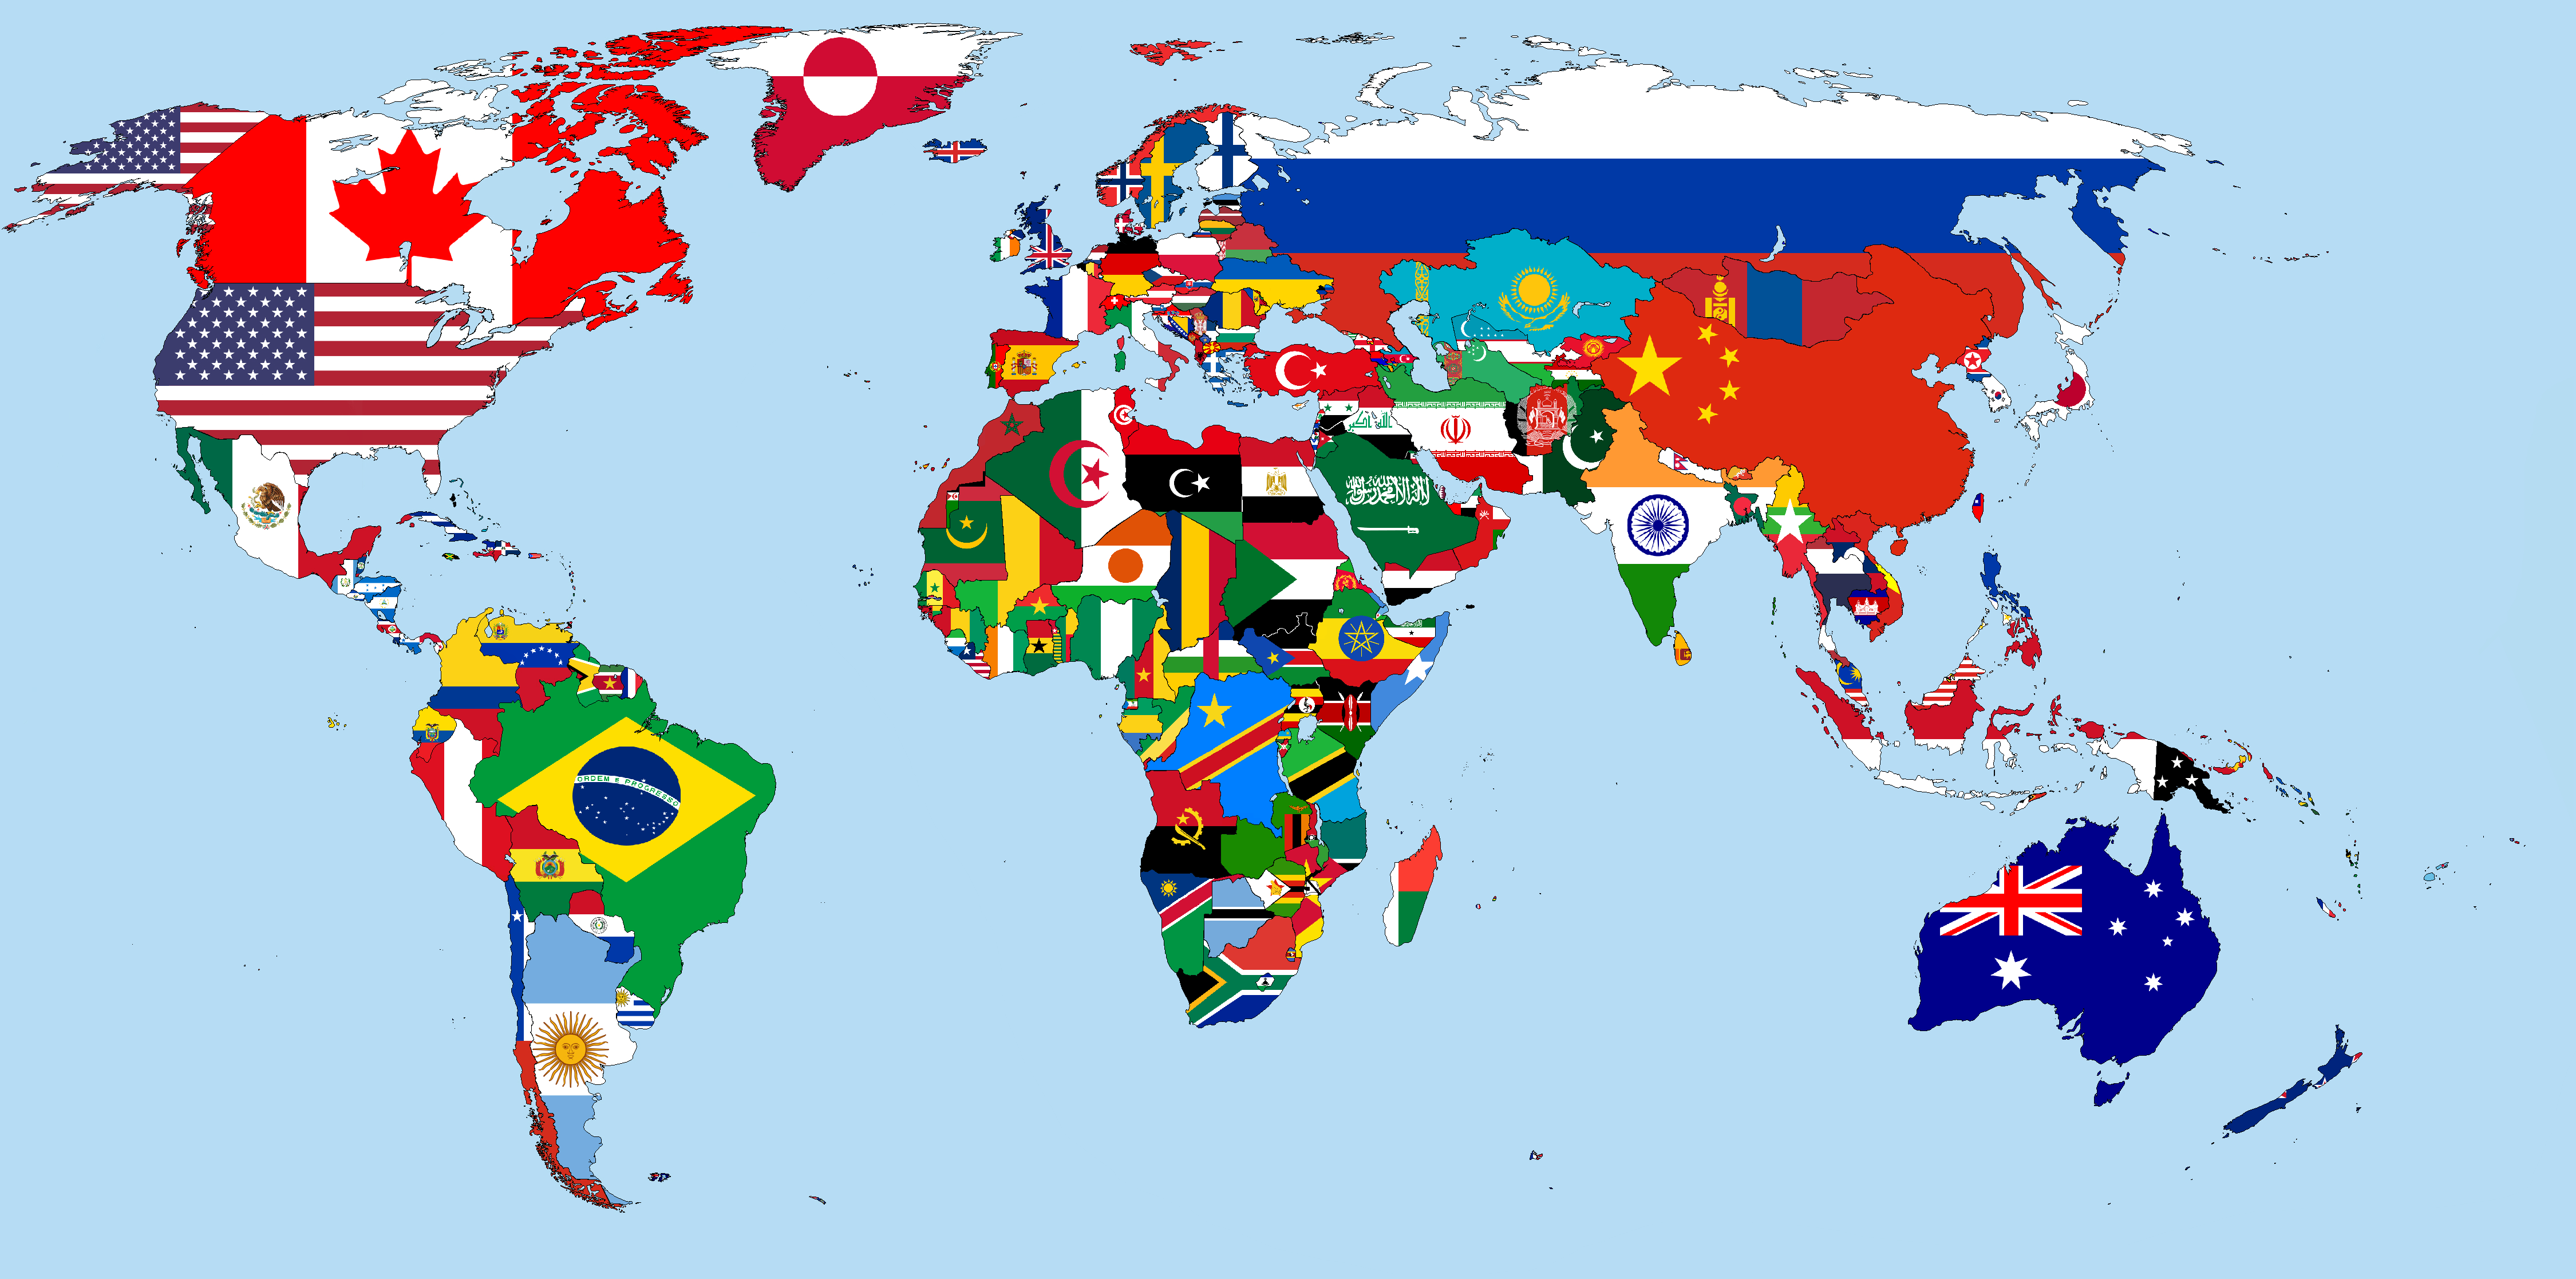 Flags Of The World Quiz